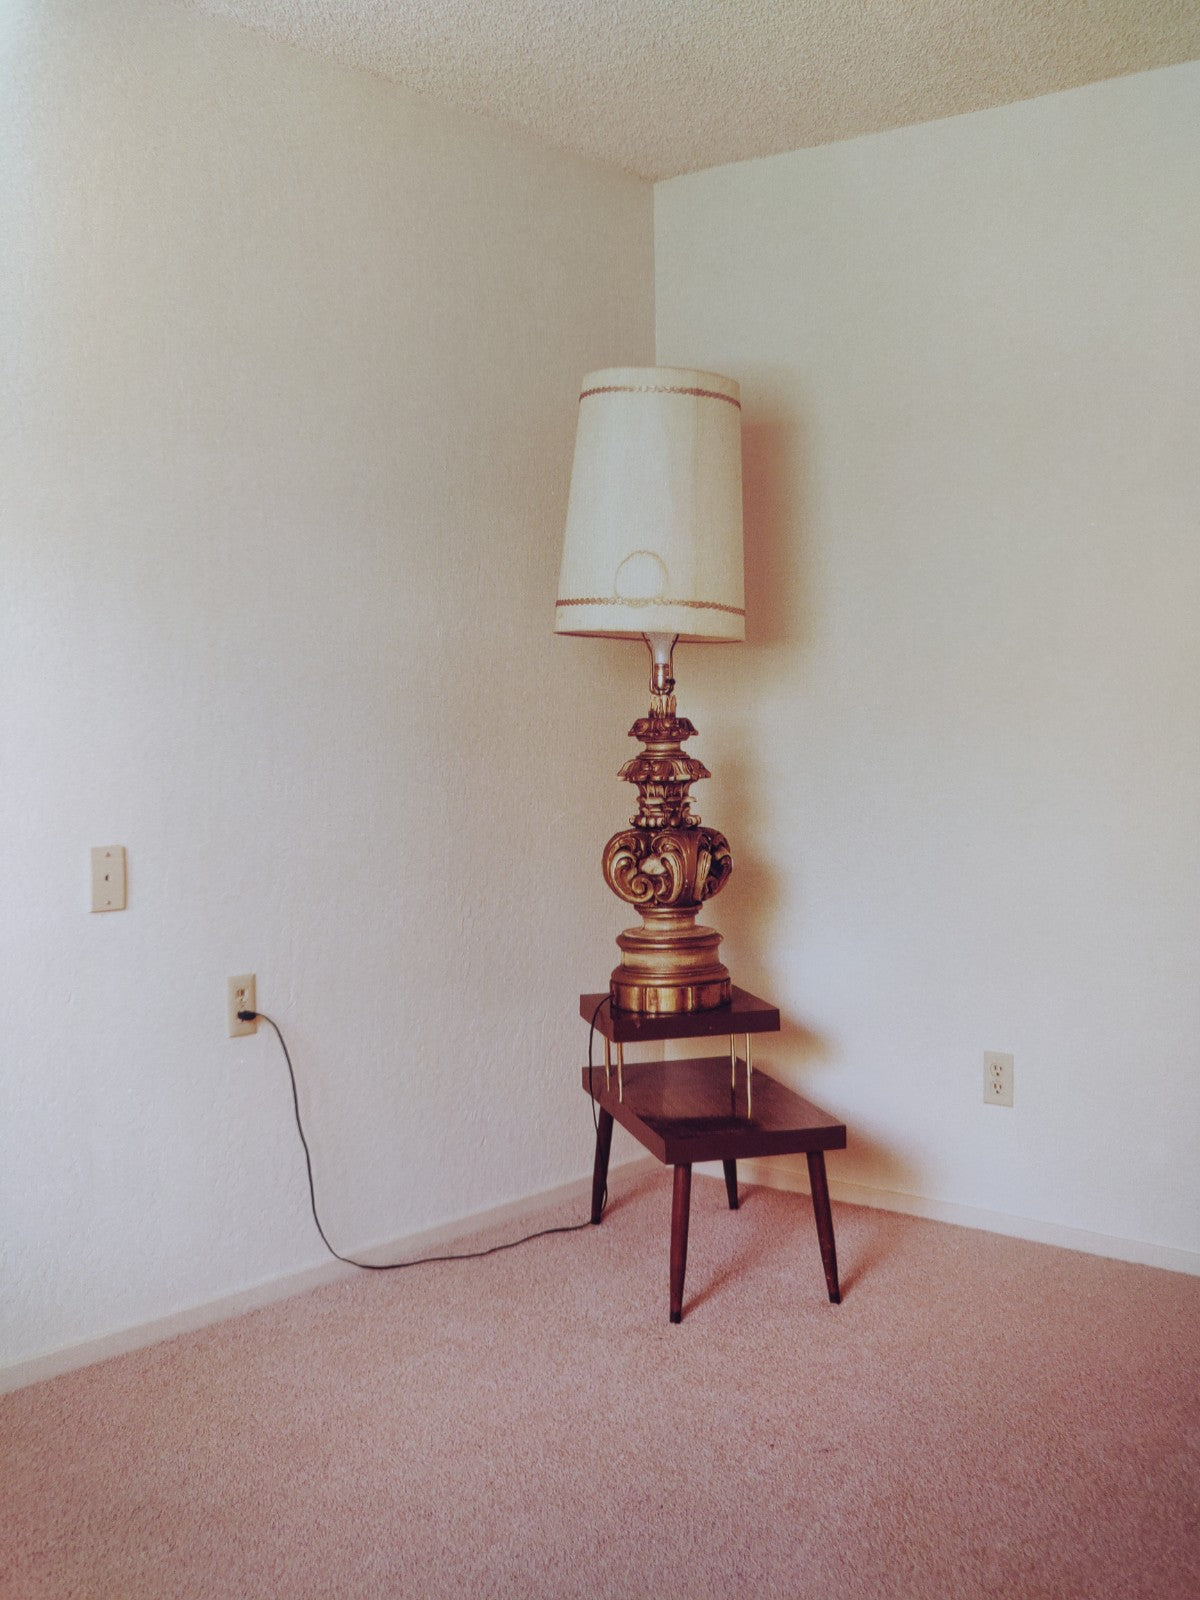 Buy JGS: Witness Number Seven by Todd Hido signed online